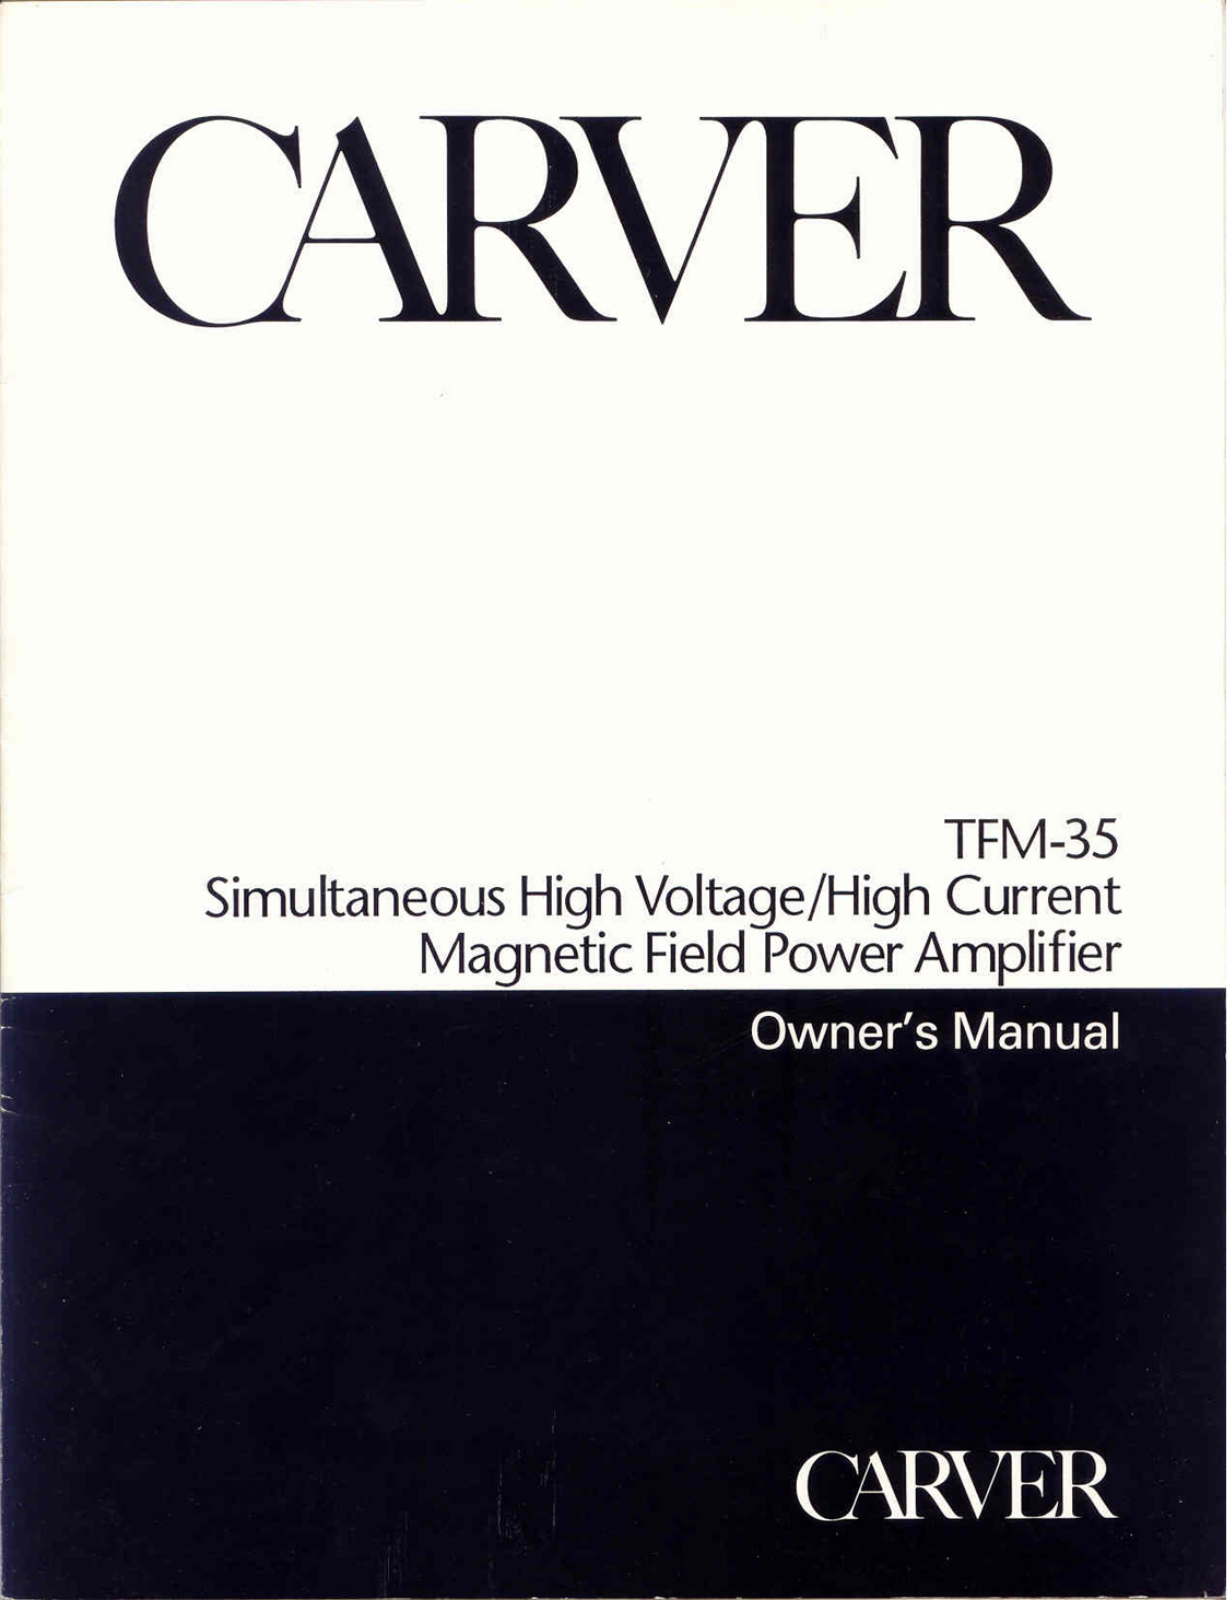 Carver TFM-35 Owners manual